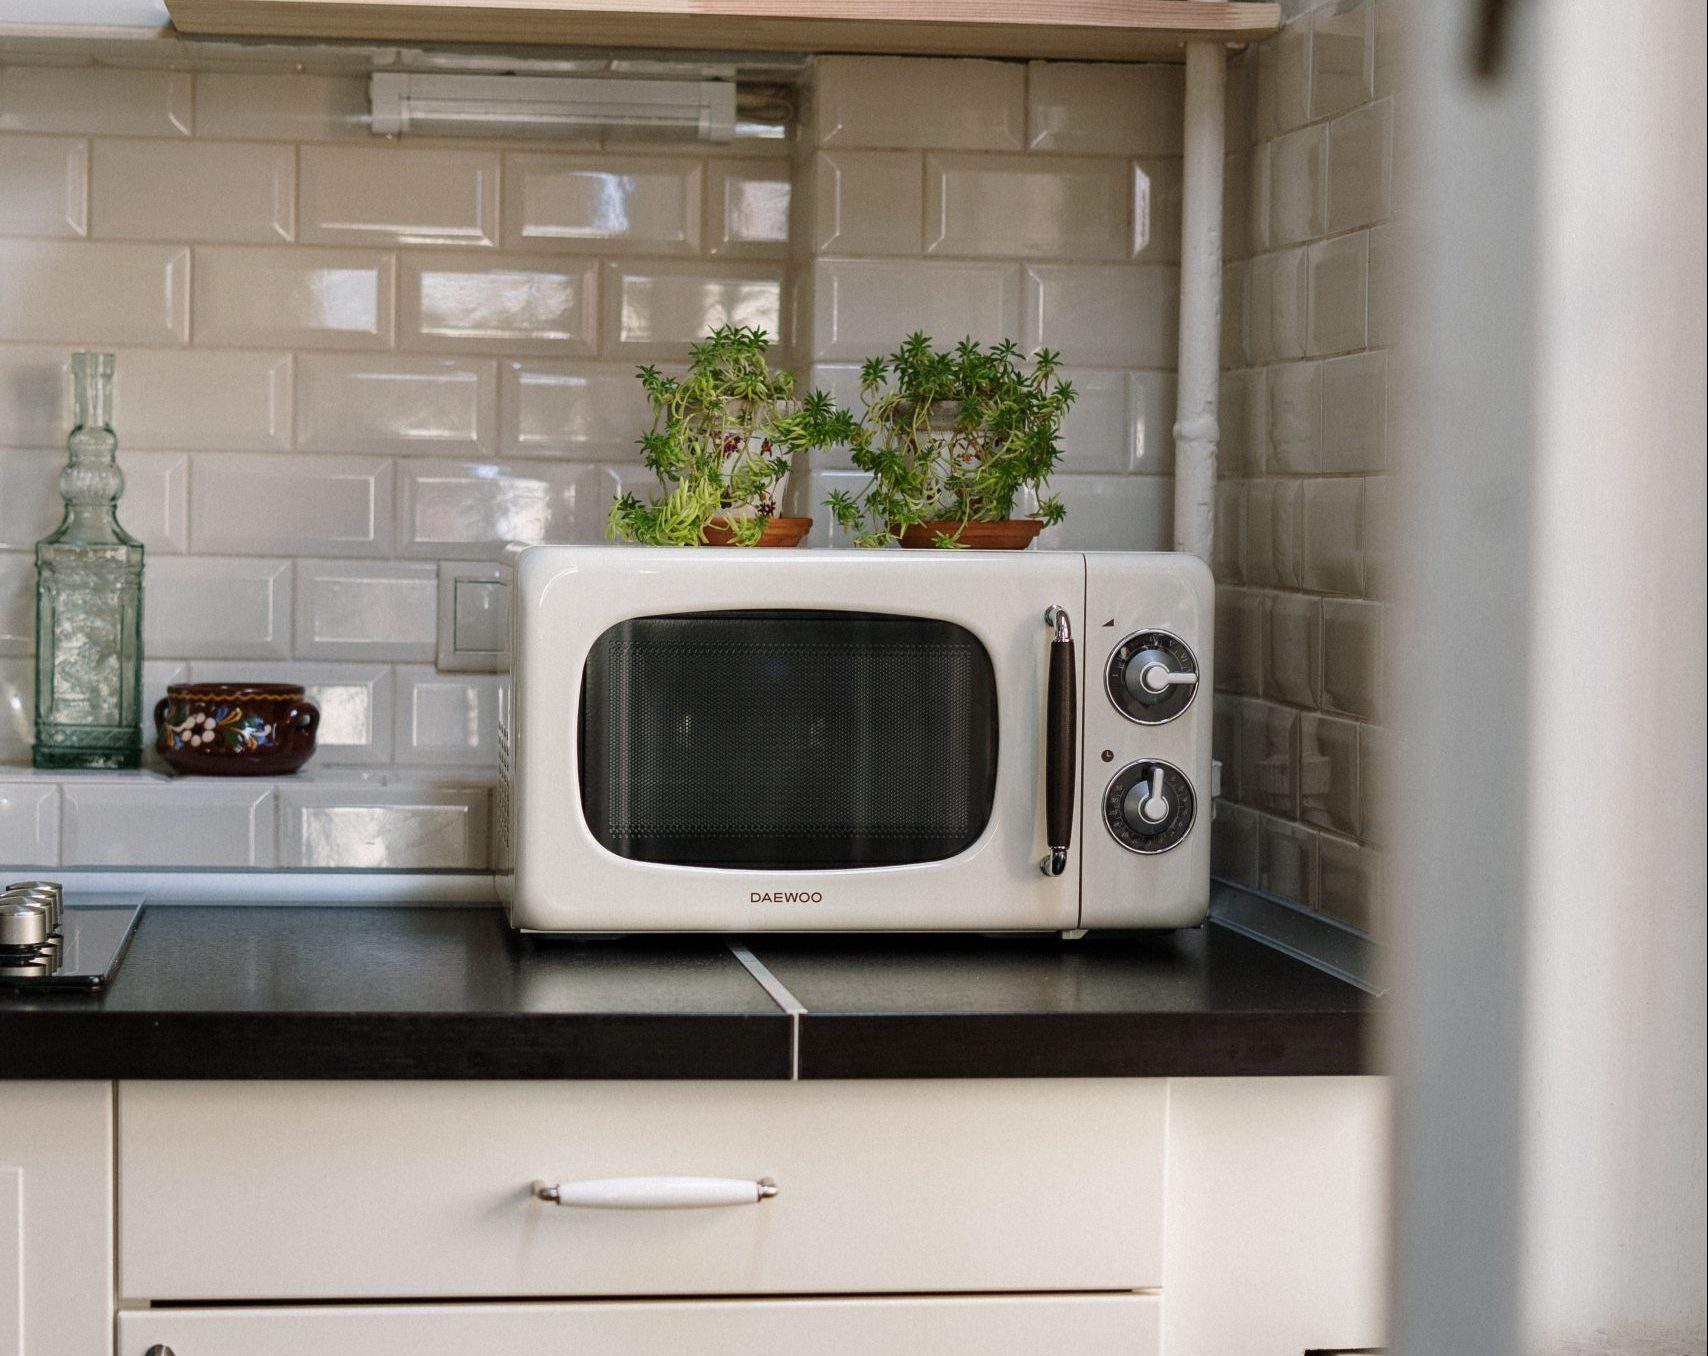 white microwave in the kitchen